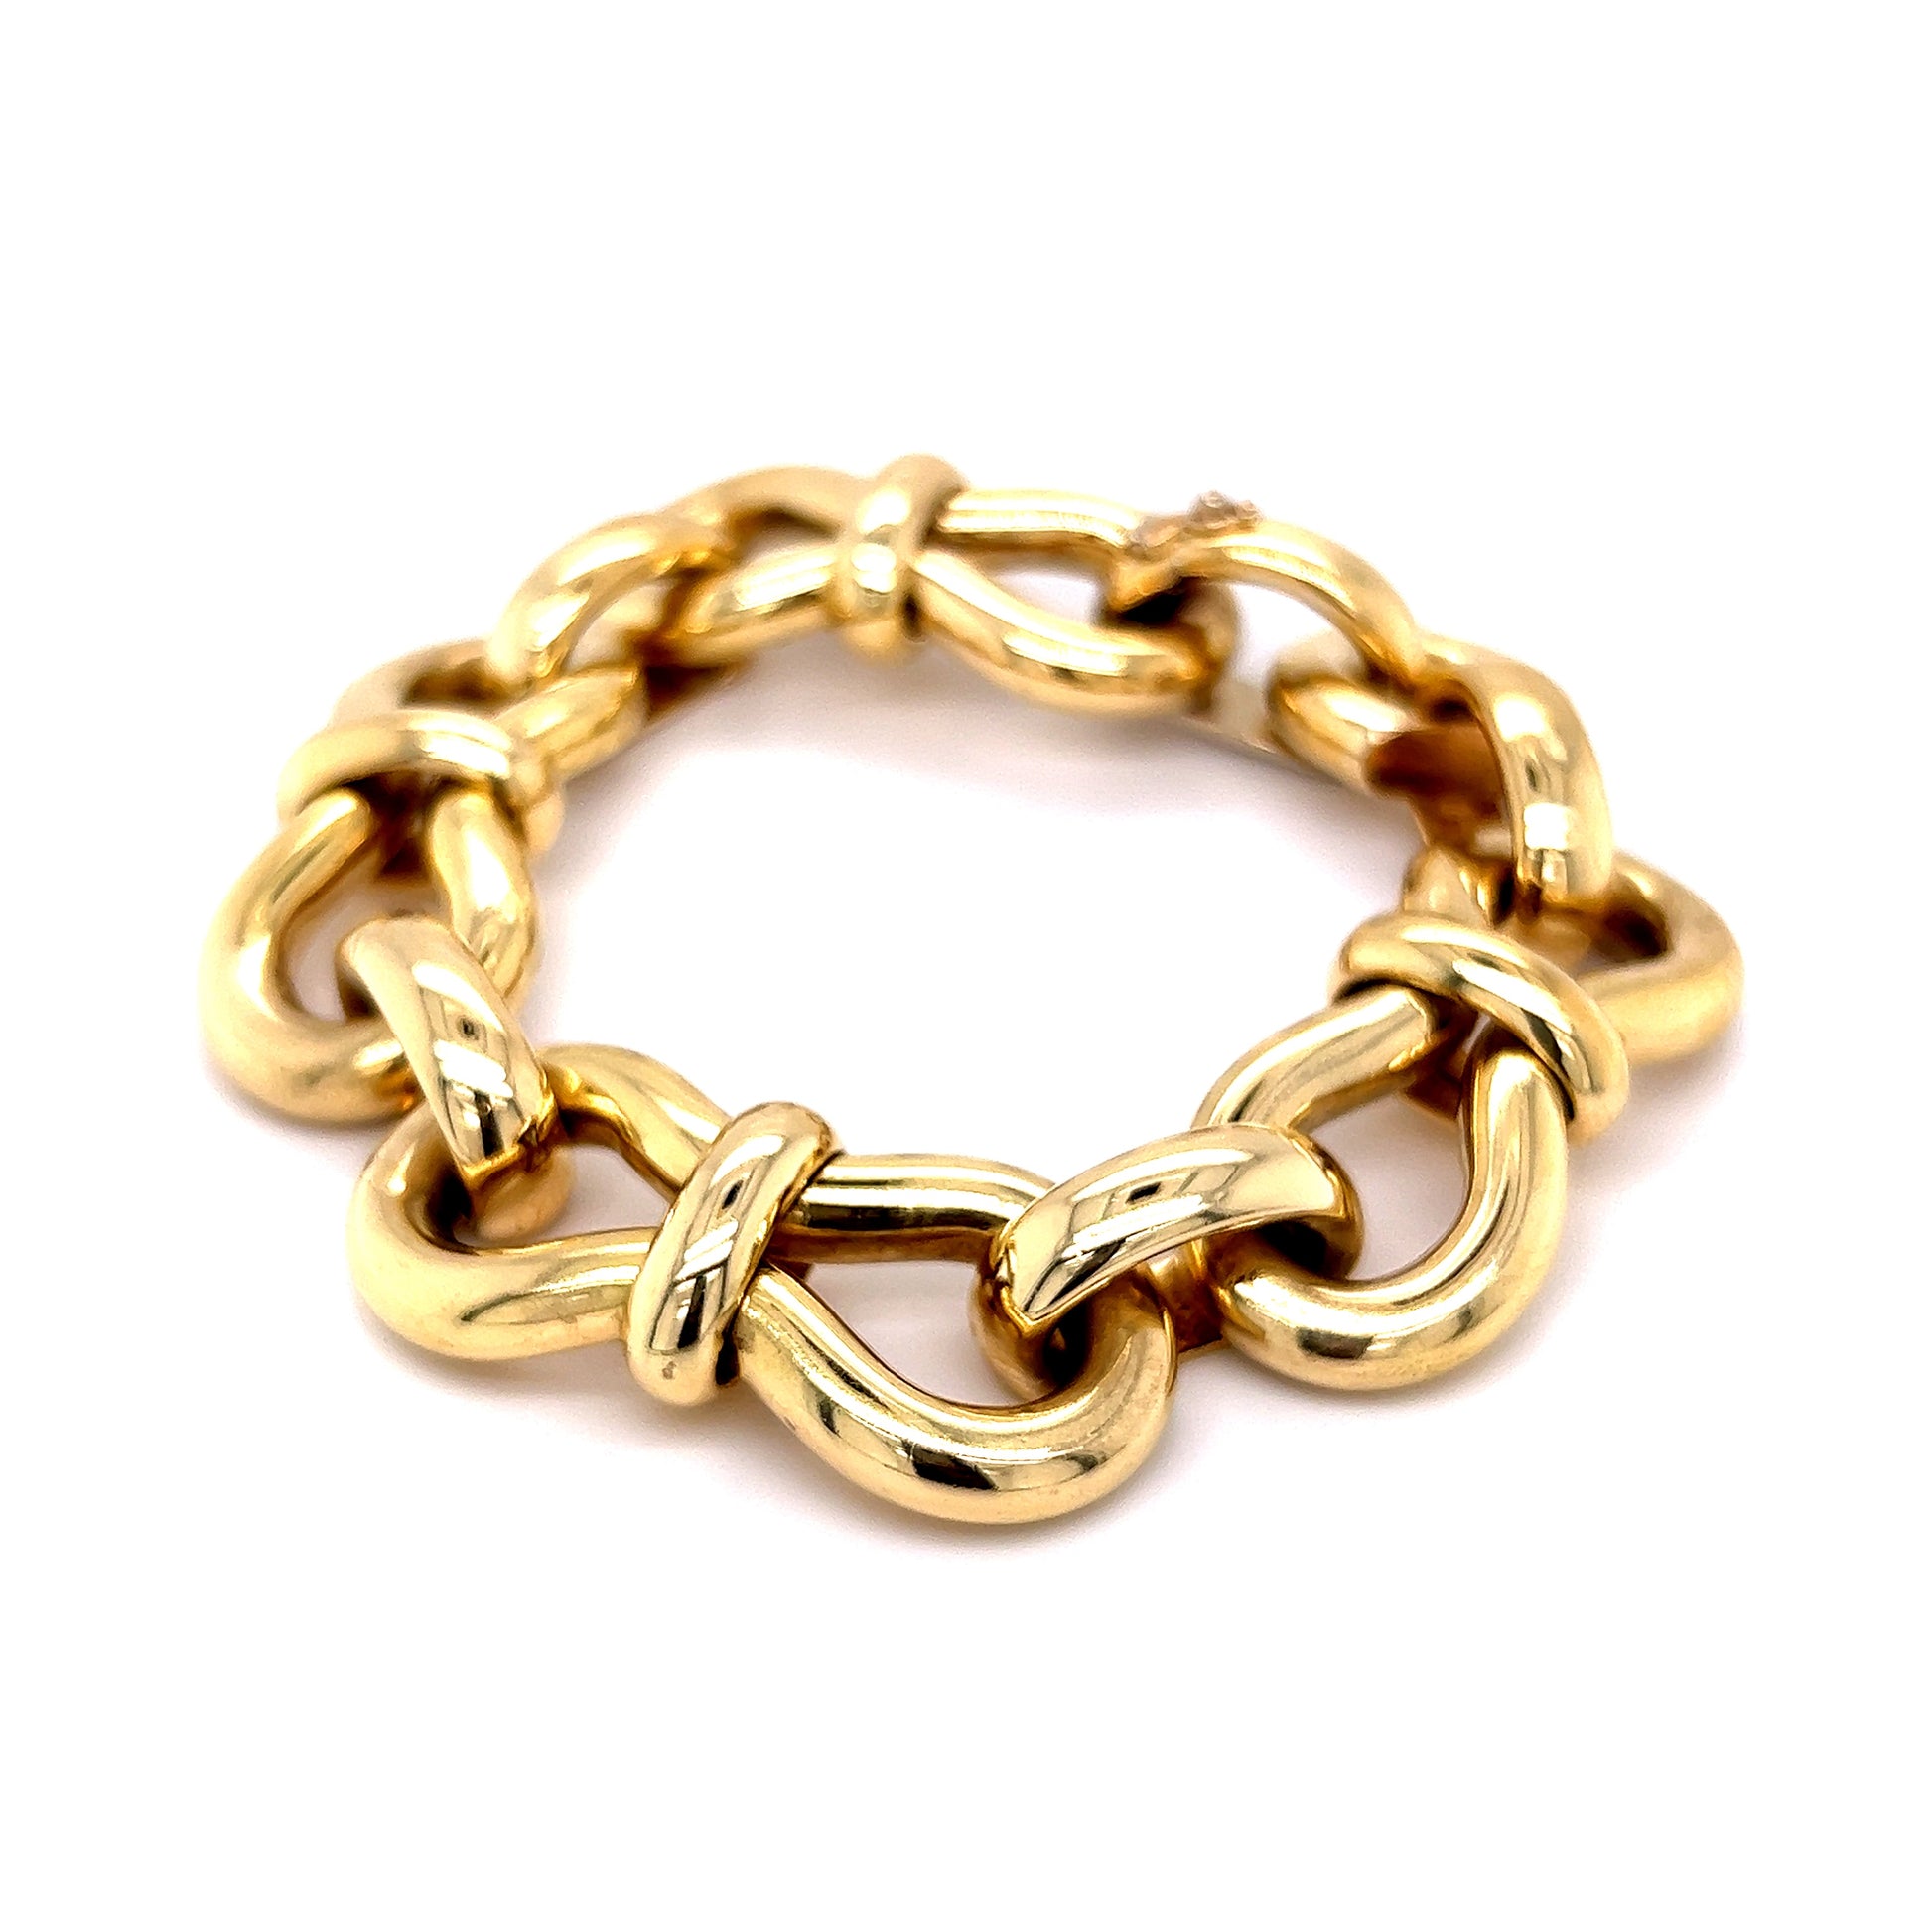 Mid-Century Chunky Link Bracelet in 18k Yellow GoldComposition: 18 Karat Yellow Gold Total Gram Weight: 51.63 g Inscription: 18KT ITALY ORSHEIM'S
      